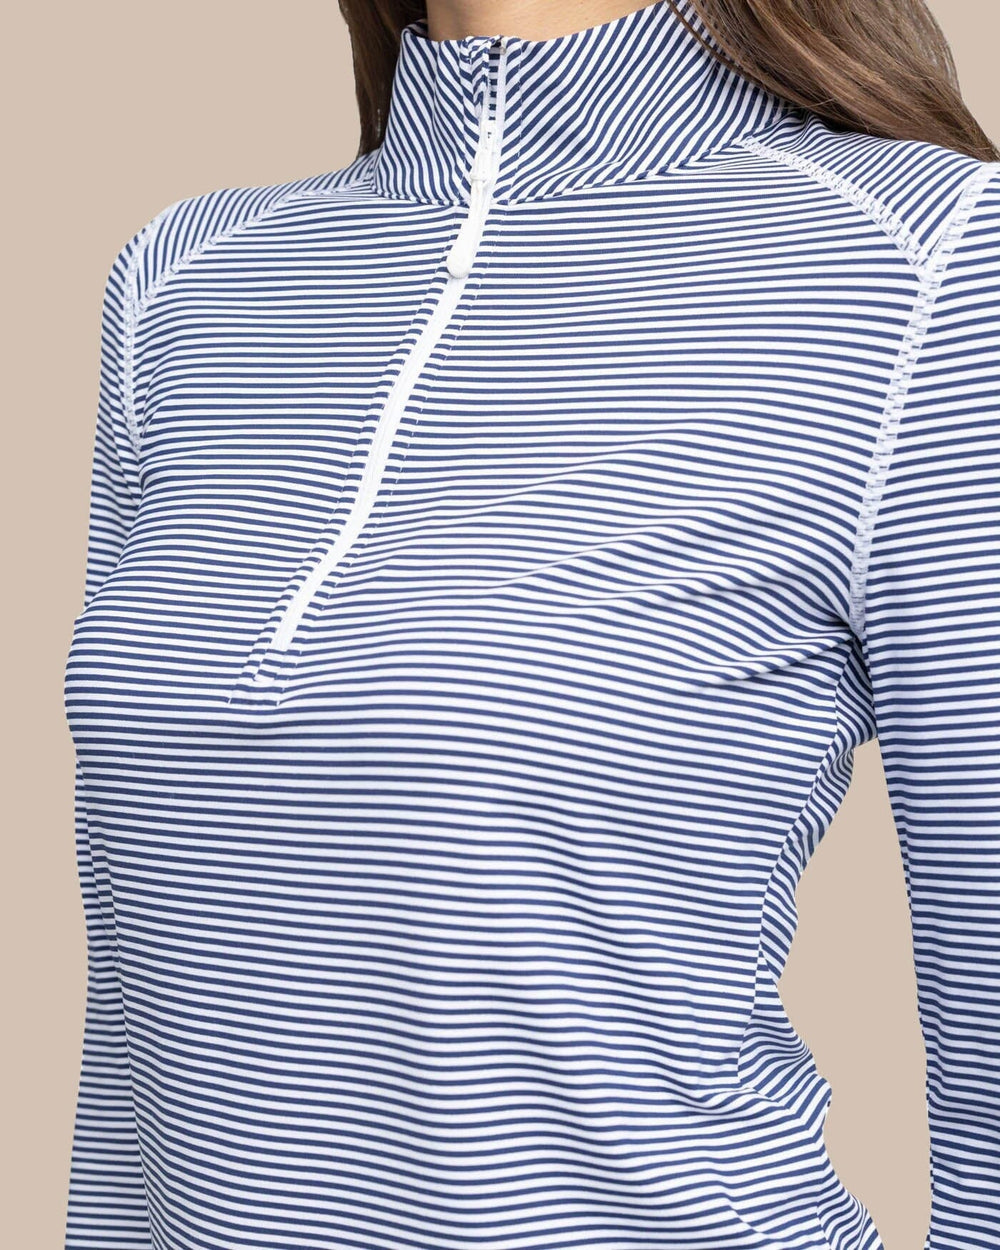 The detail view of the Southern Tide Team Colors Runaround Quarter Zip Pull Over by Southern Tide - Nautical Navy